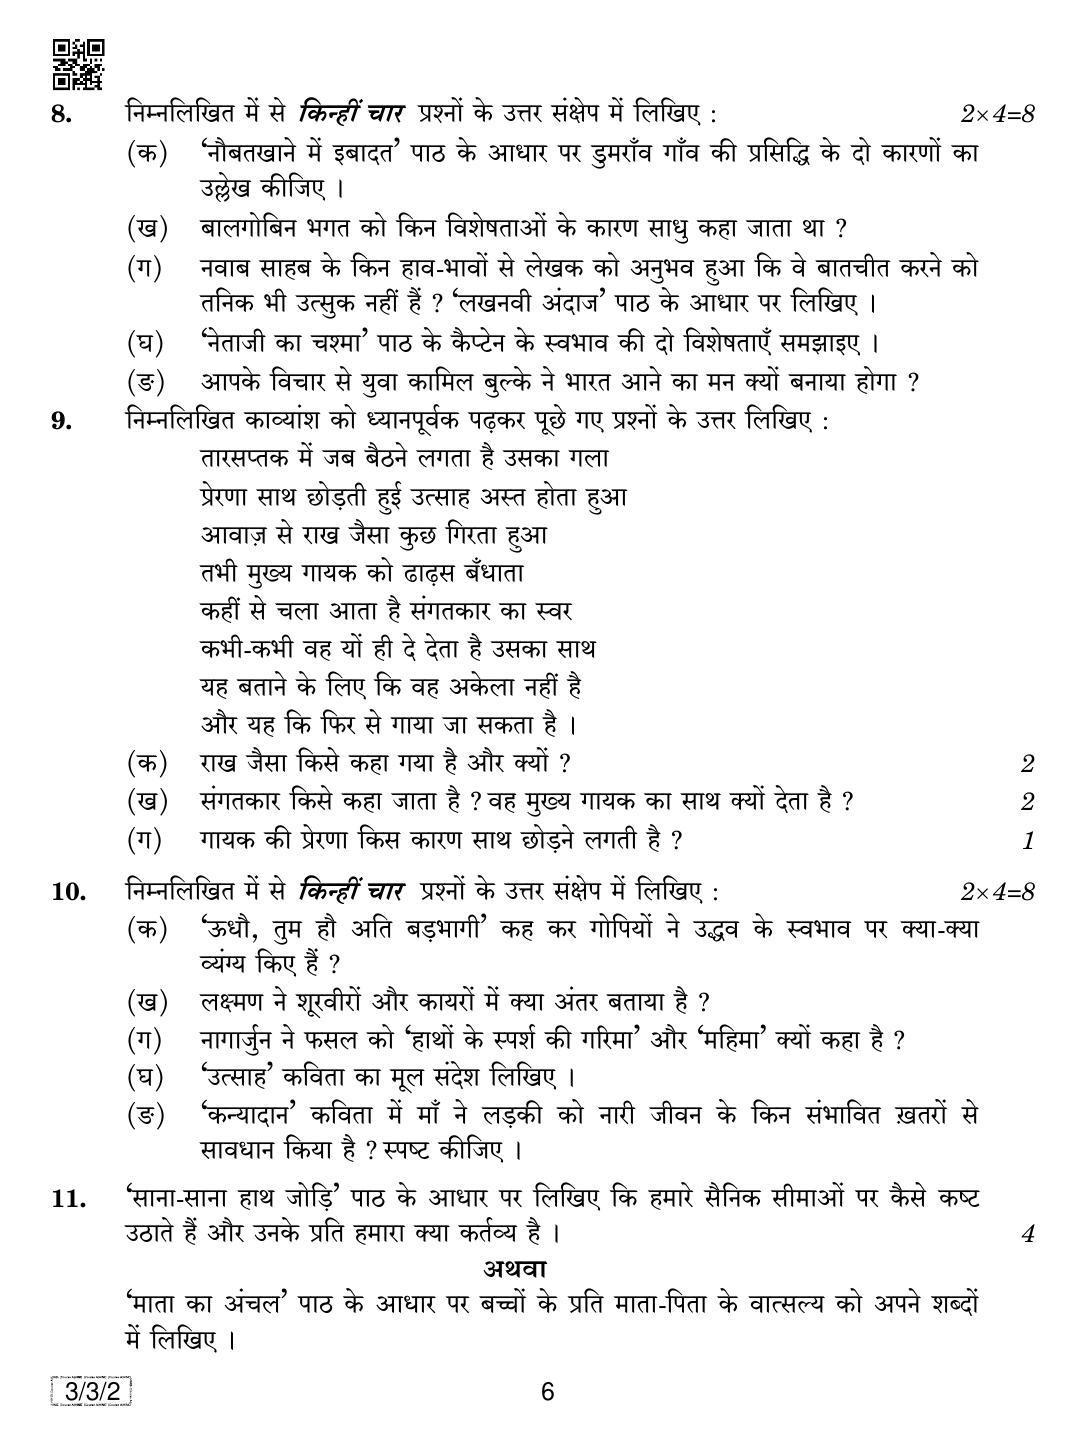 CBSE Class 10 3-3-2 HINDI COURSE- A 2019 Question Paper - Page 6